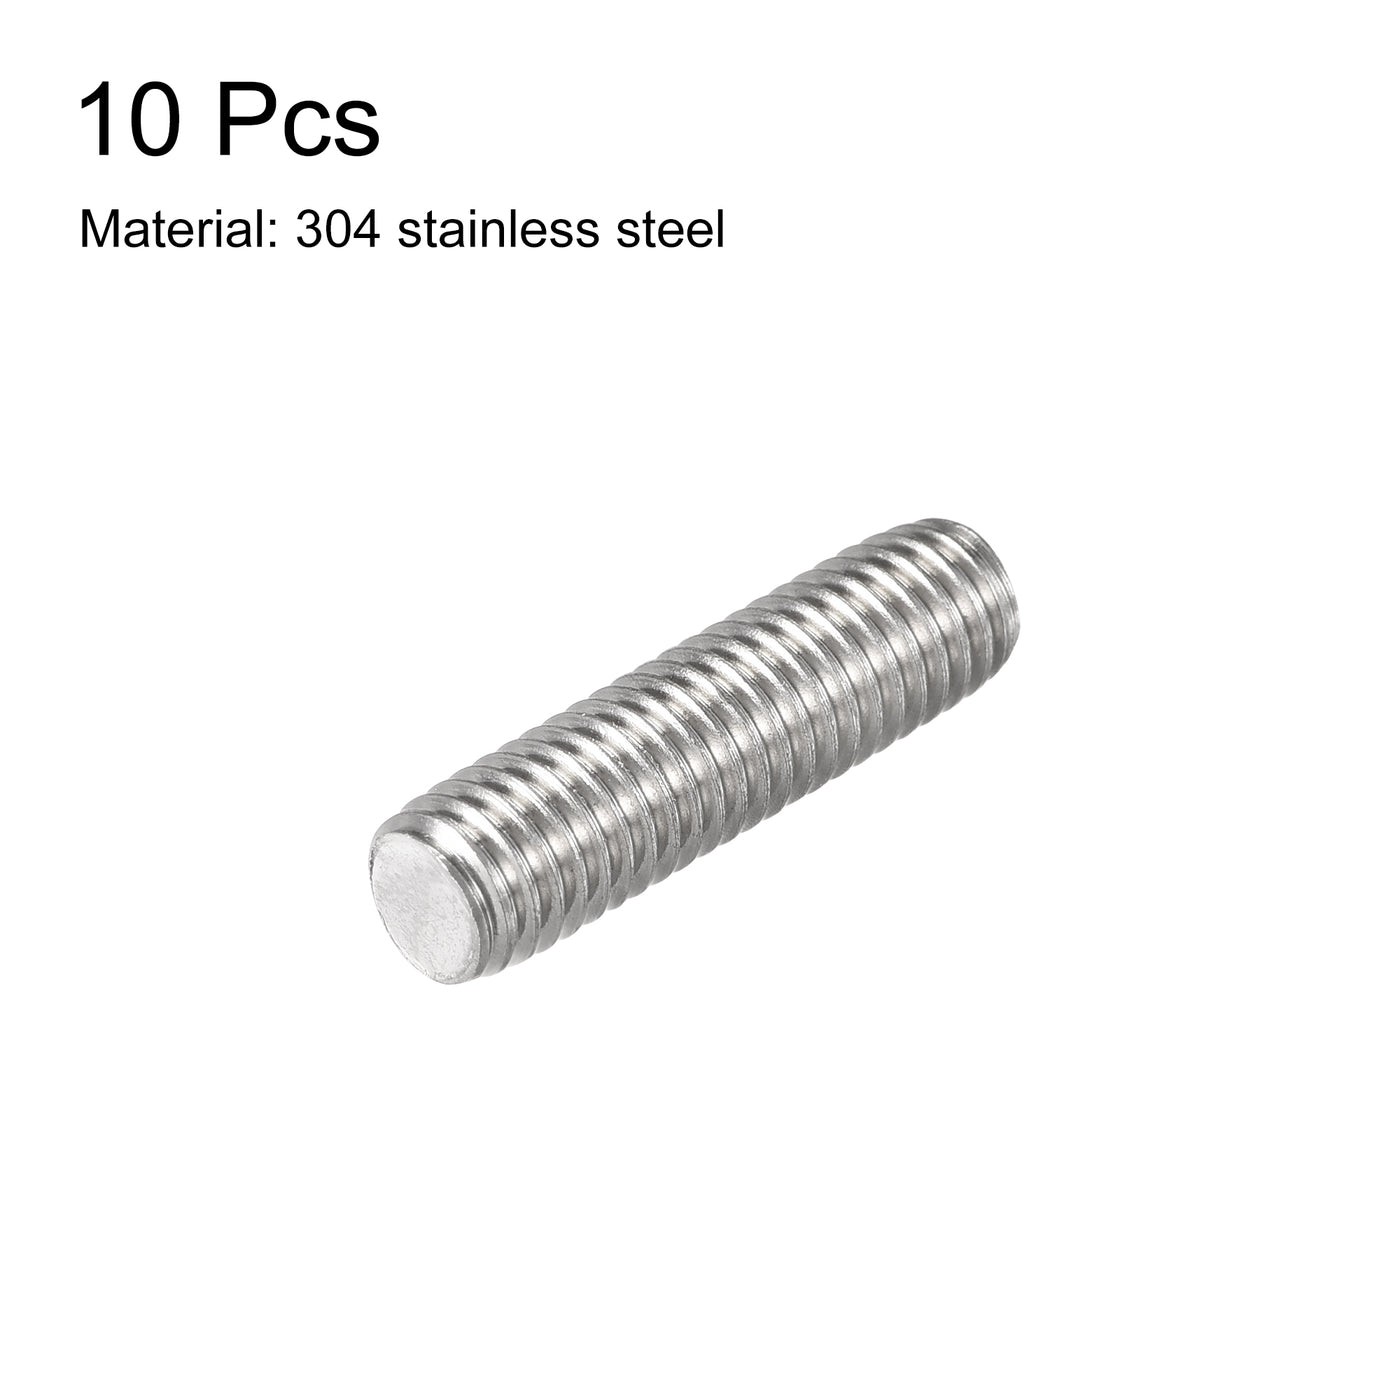 uxcell Uxcell 10pcs M8 x 30mm Fully Threaded Rod 304 Stainless Steel Right Hand Threads